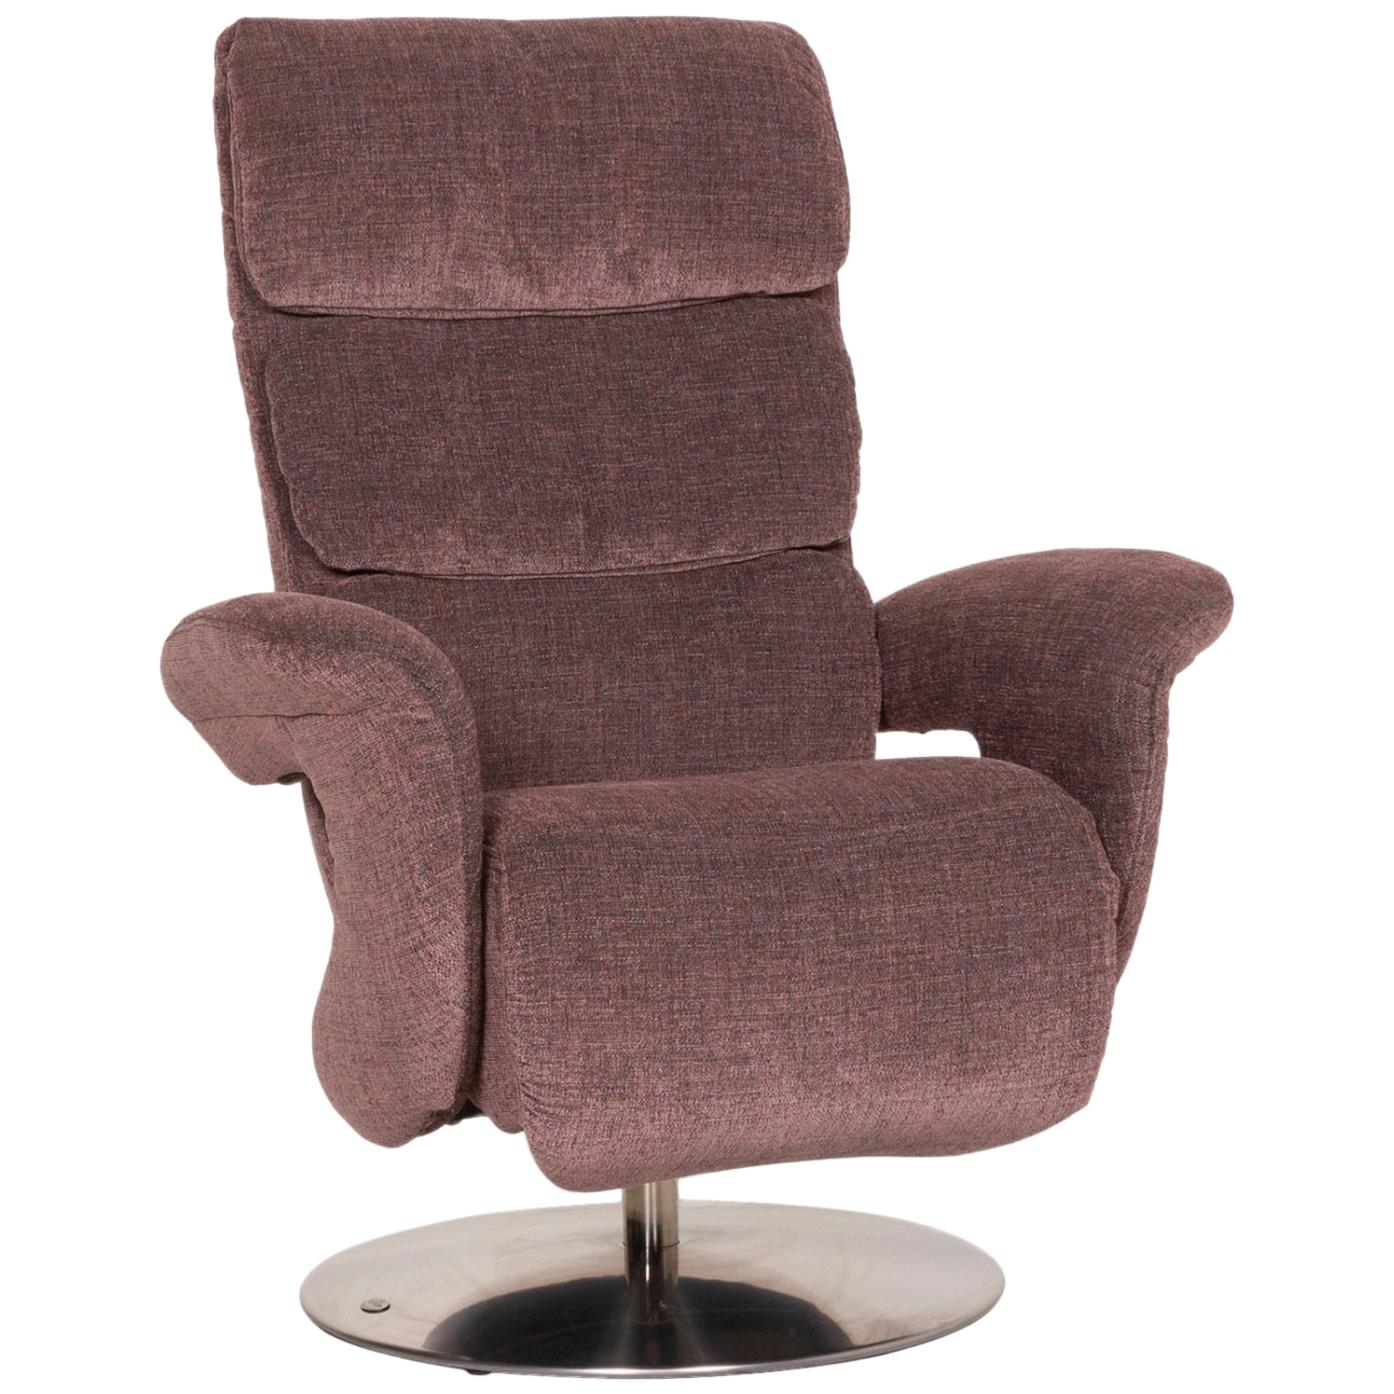 Himolla Hurley Fabric Armchair Rose Relax Function For Sale